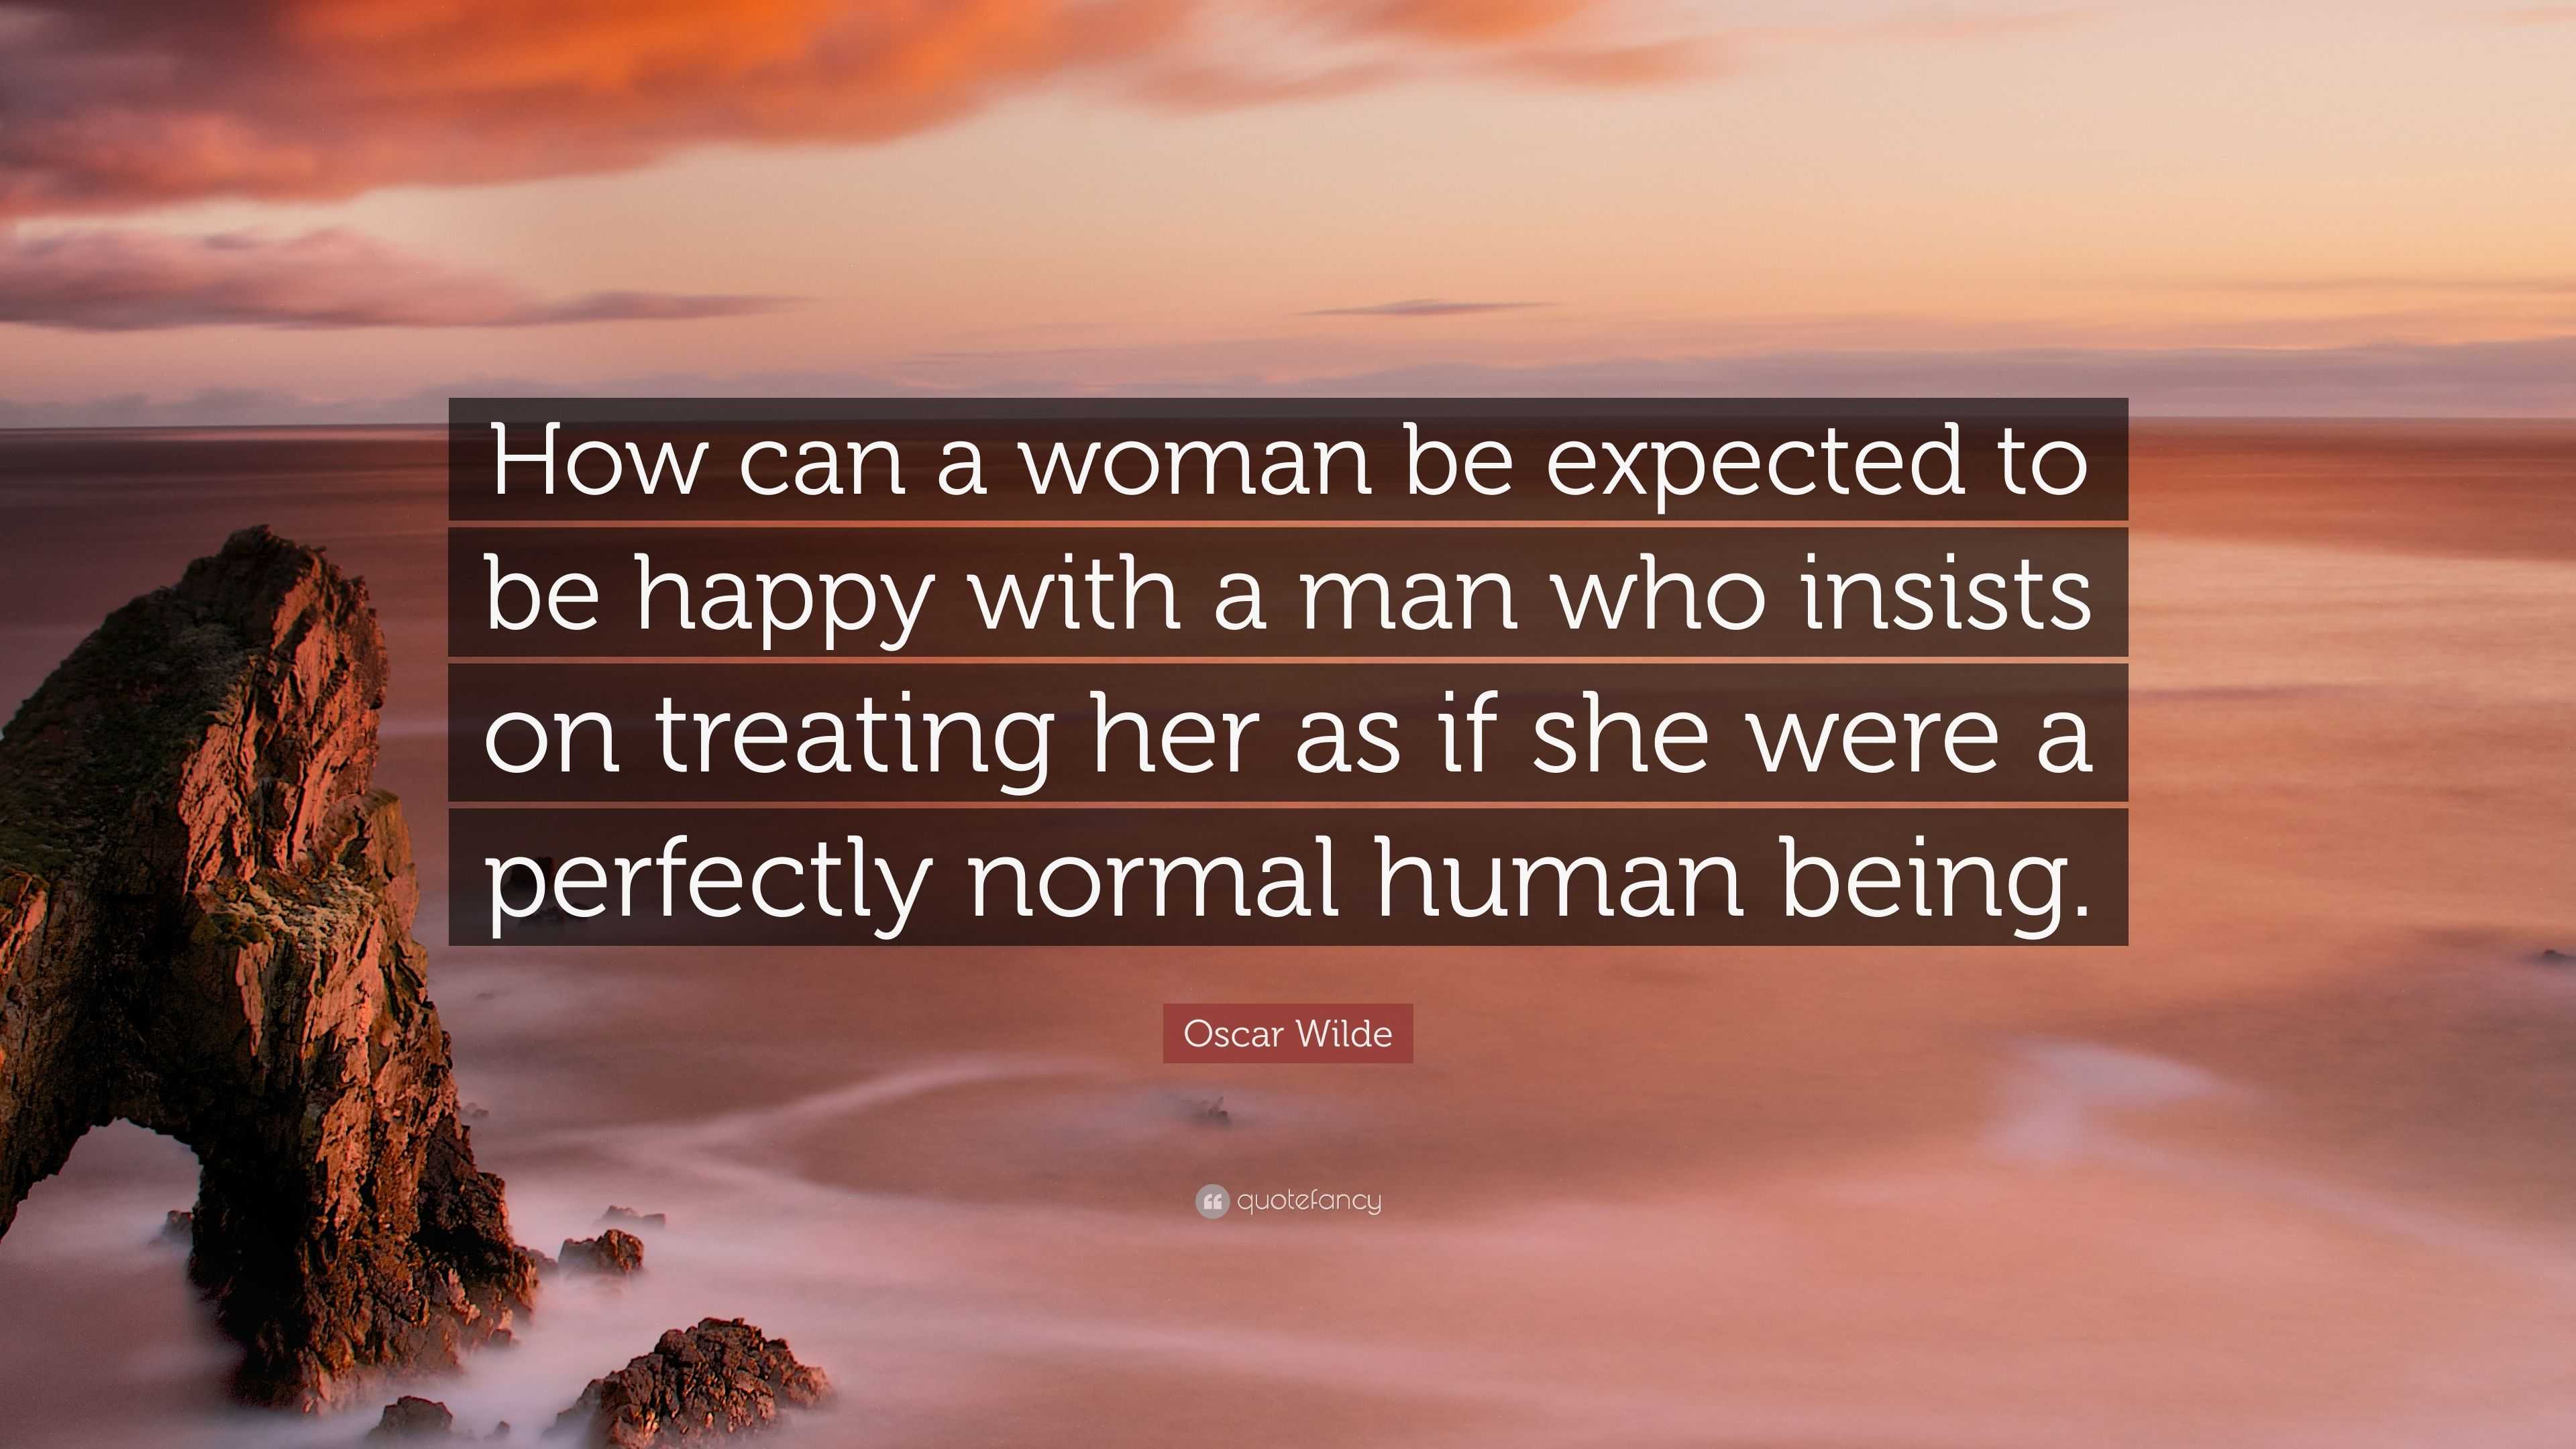 Oscar Wilde Quote: “How can a woman be expected to be happy with a man ...